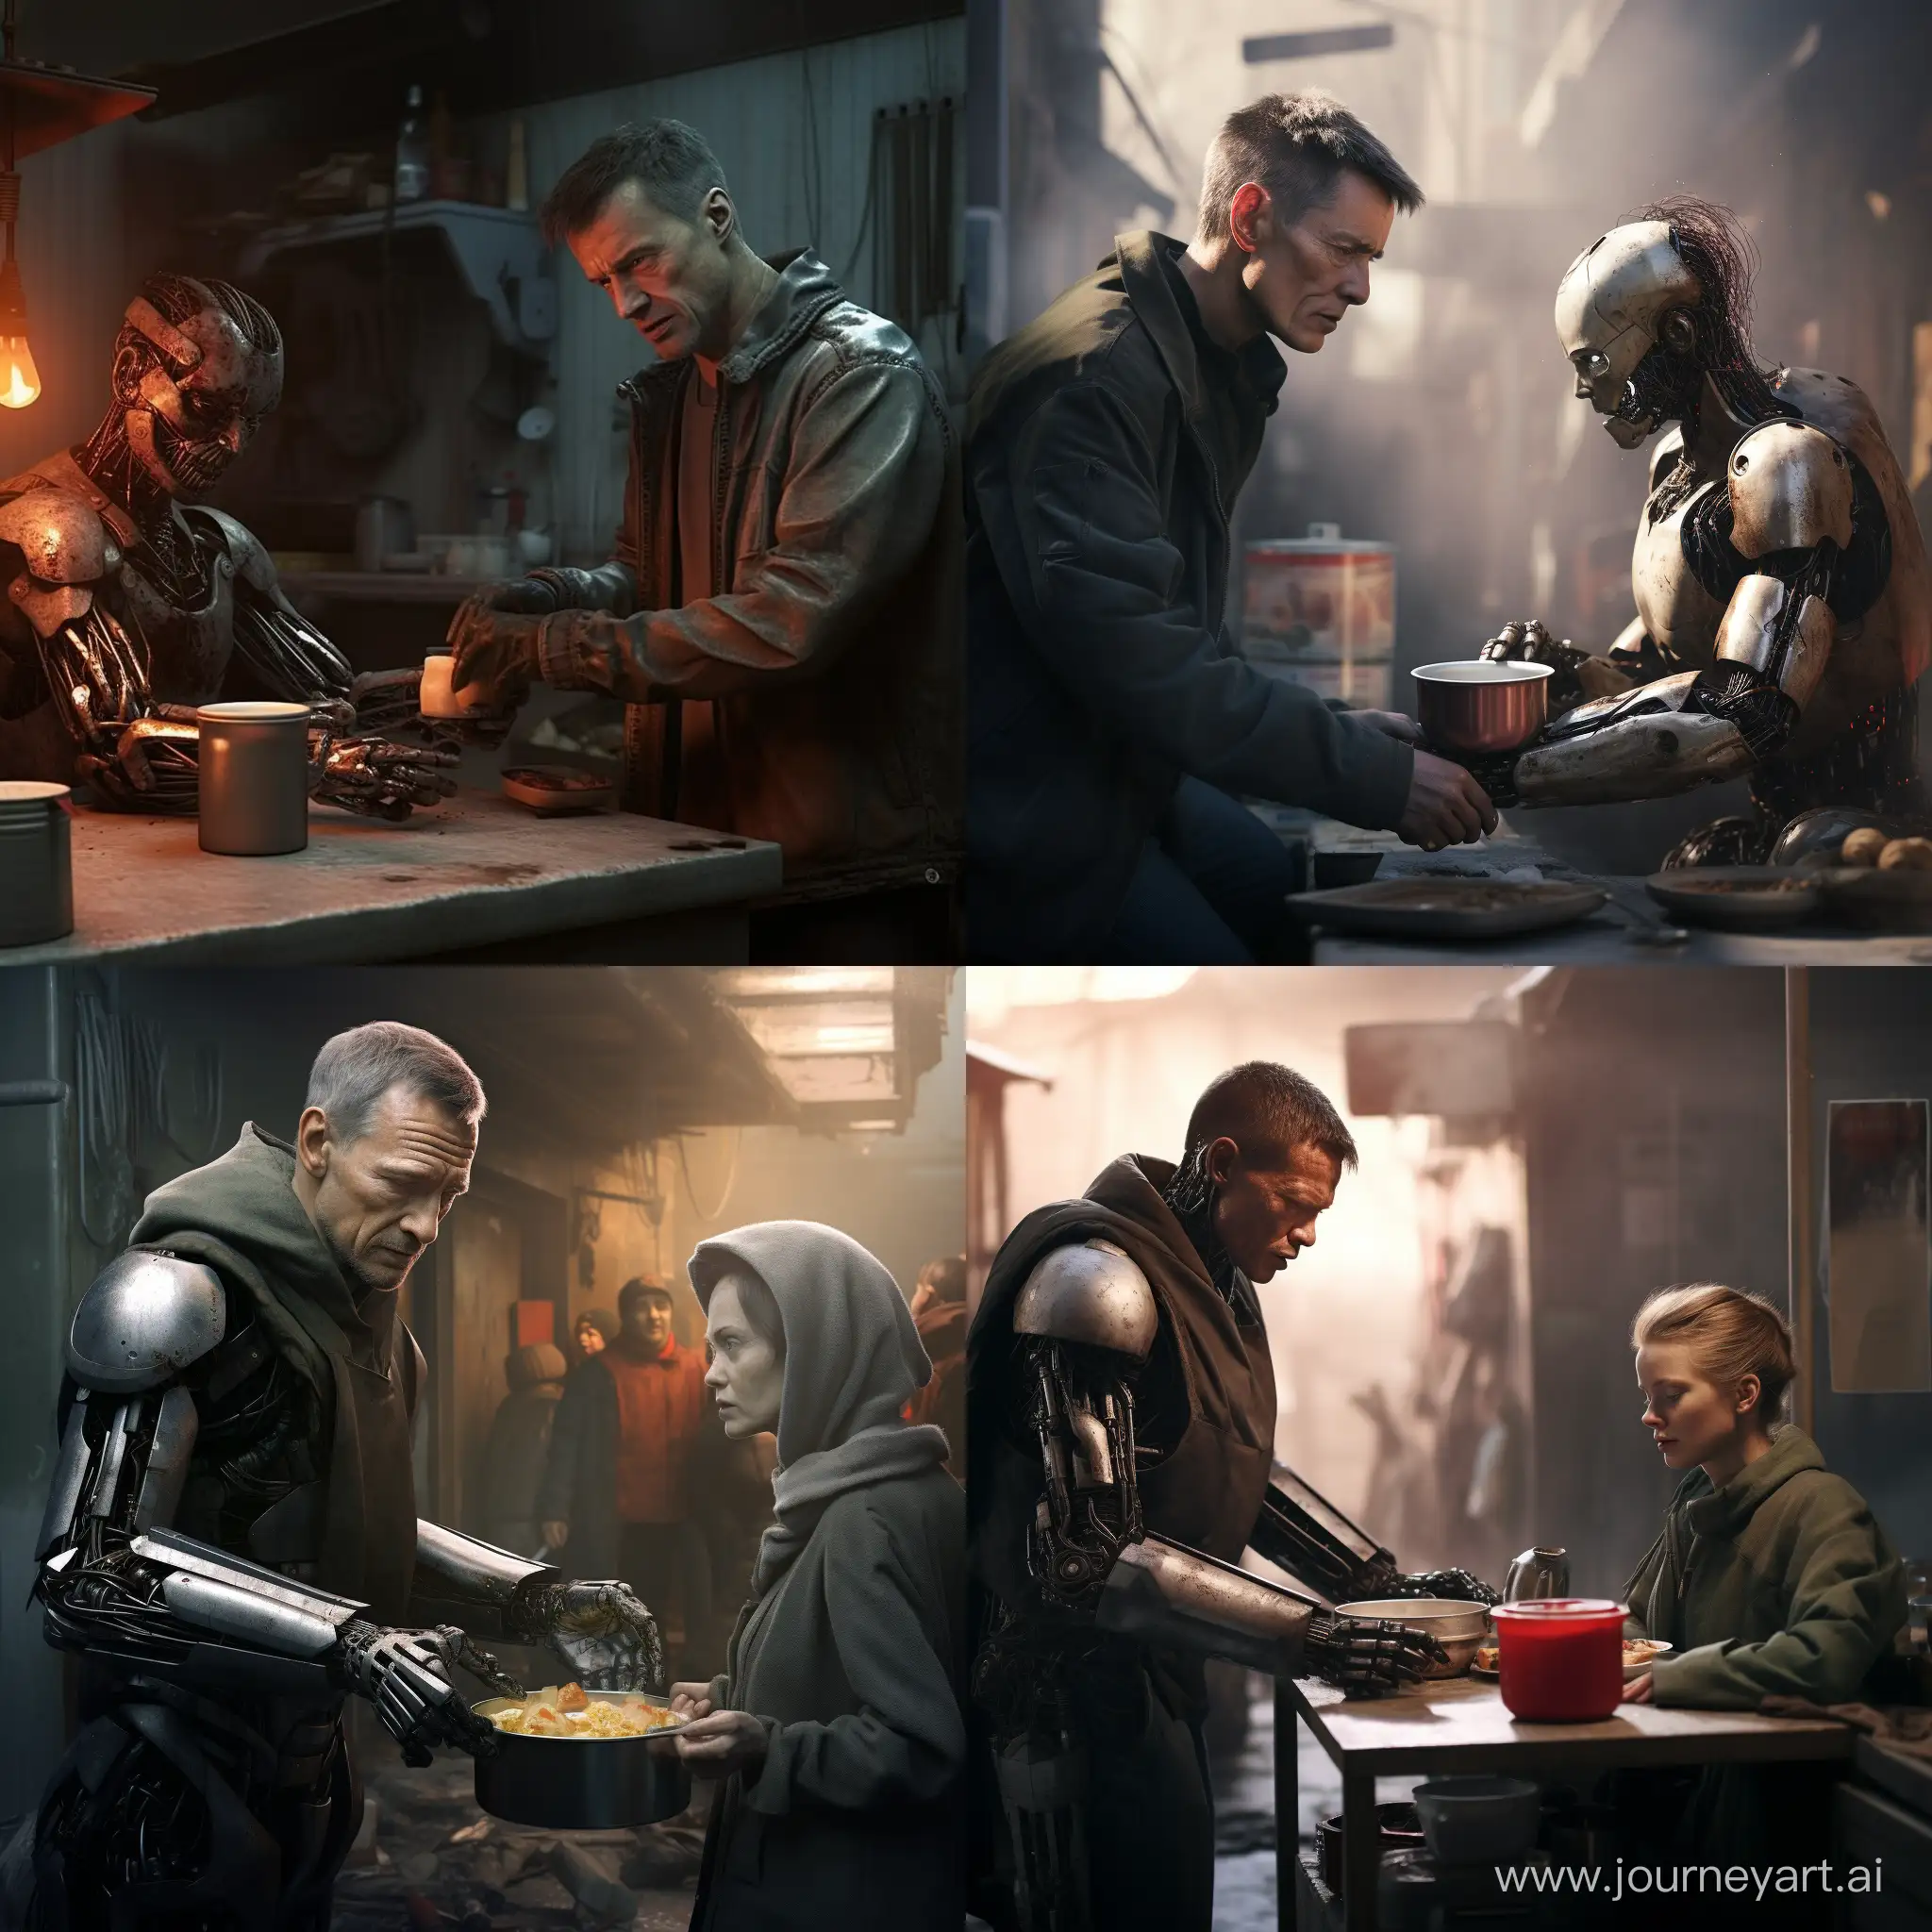 Terminator help to serve soup to homeless in kitchen,photo realistic, high resolution